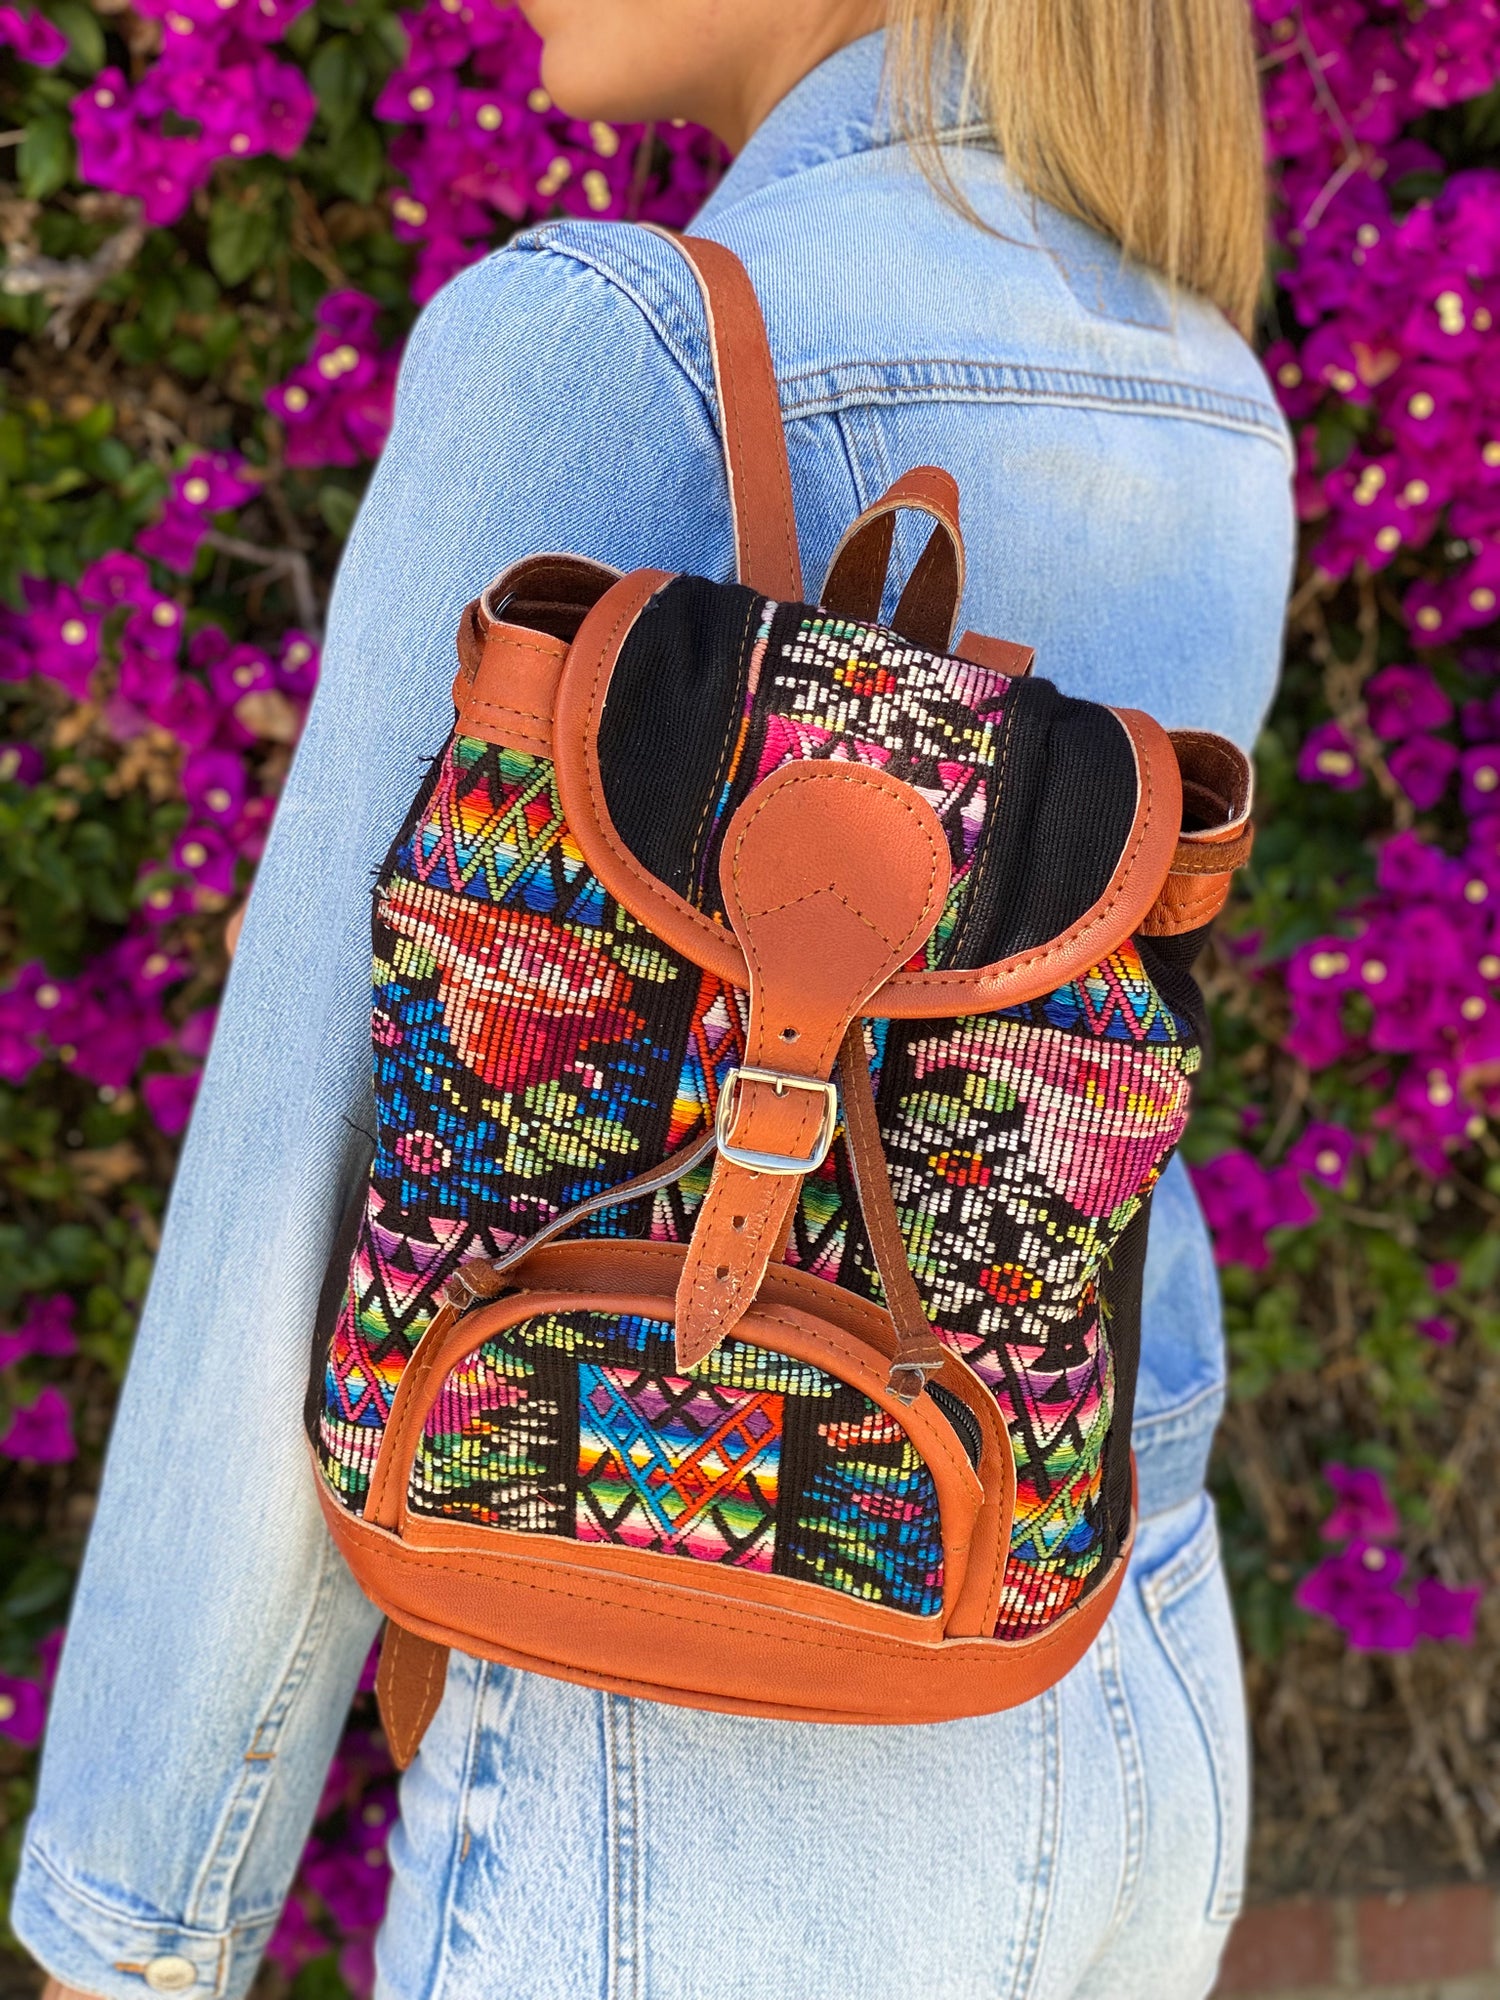 MIni leather huipil backpack hand woven with colorful embroidery and adjustable leather straps with front belt buckle closure and front zipper pocket perfect for hiking or beach trip handmade in Guatemala